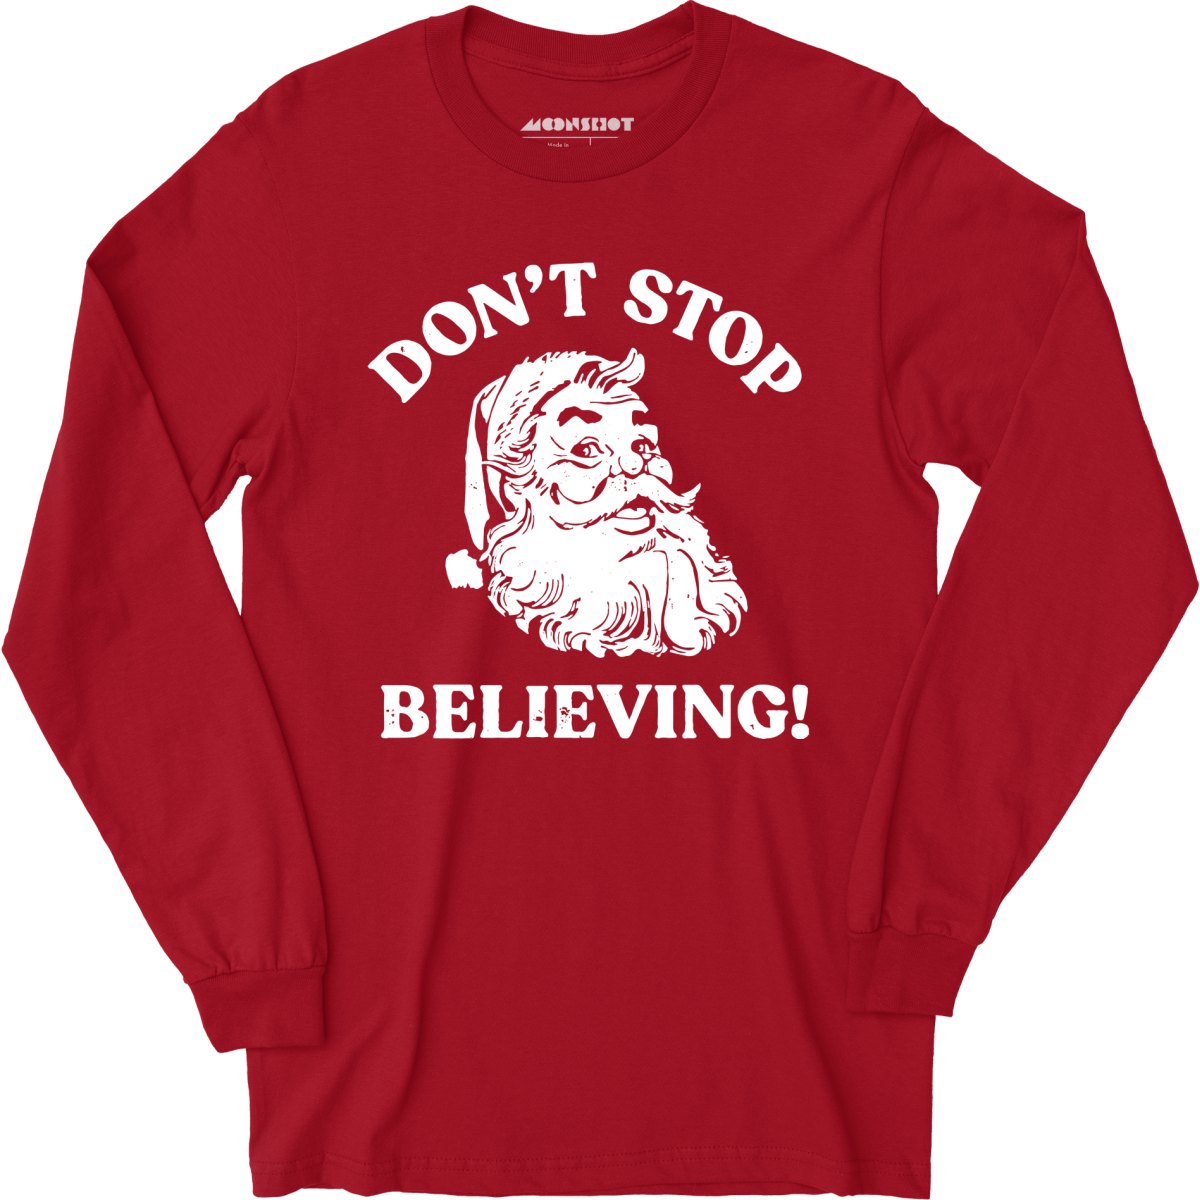 Don't Stop Believing - Long Sleeve T-Shirt